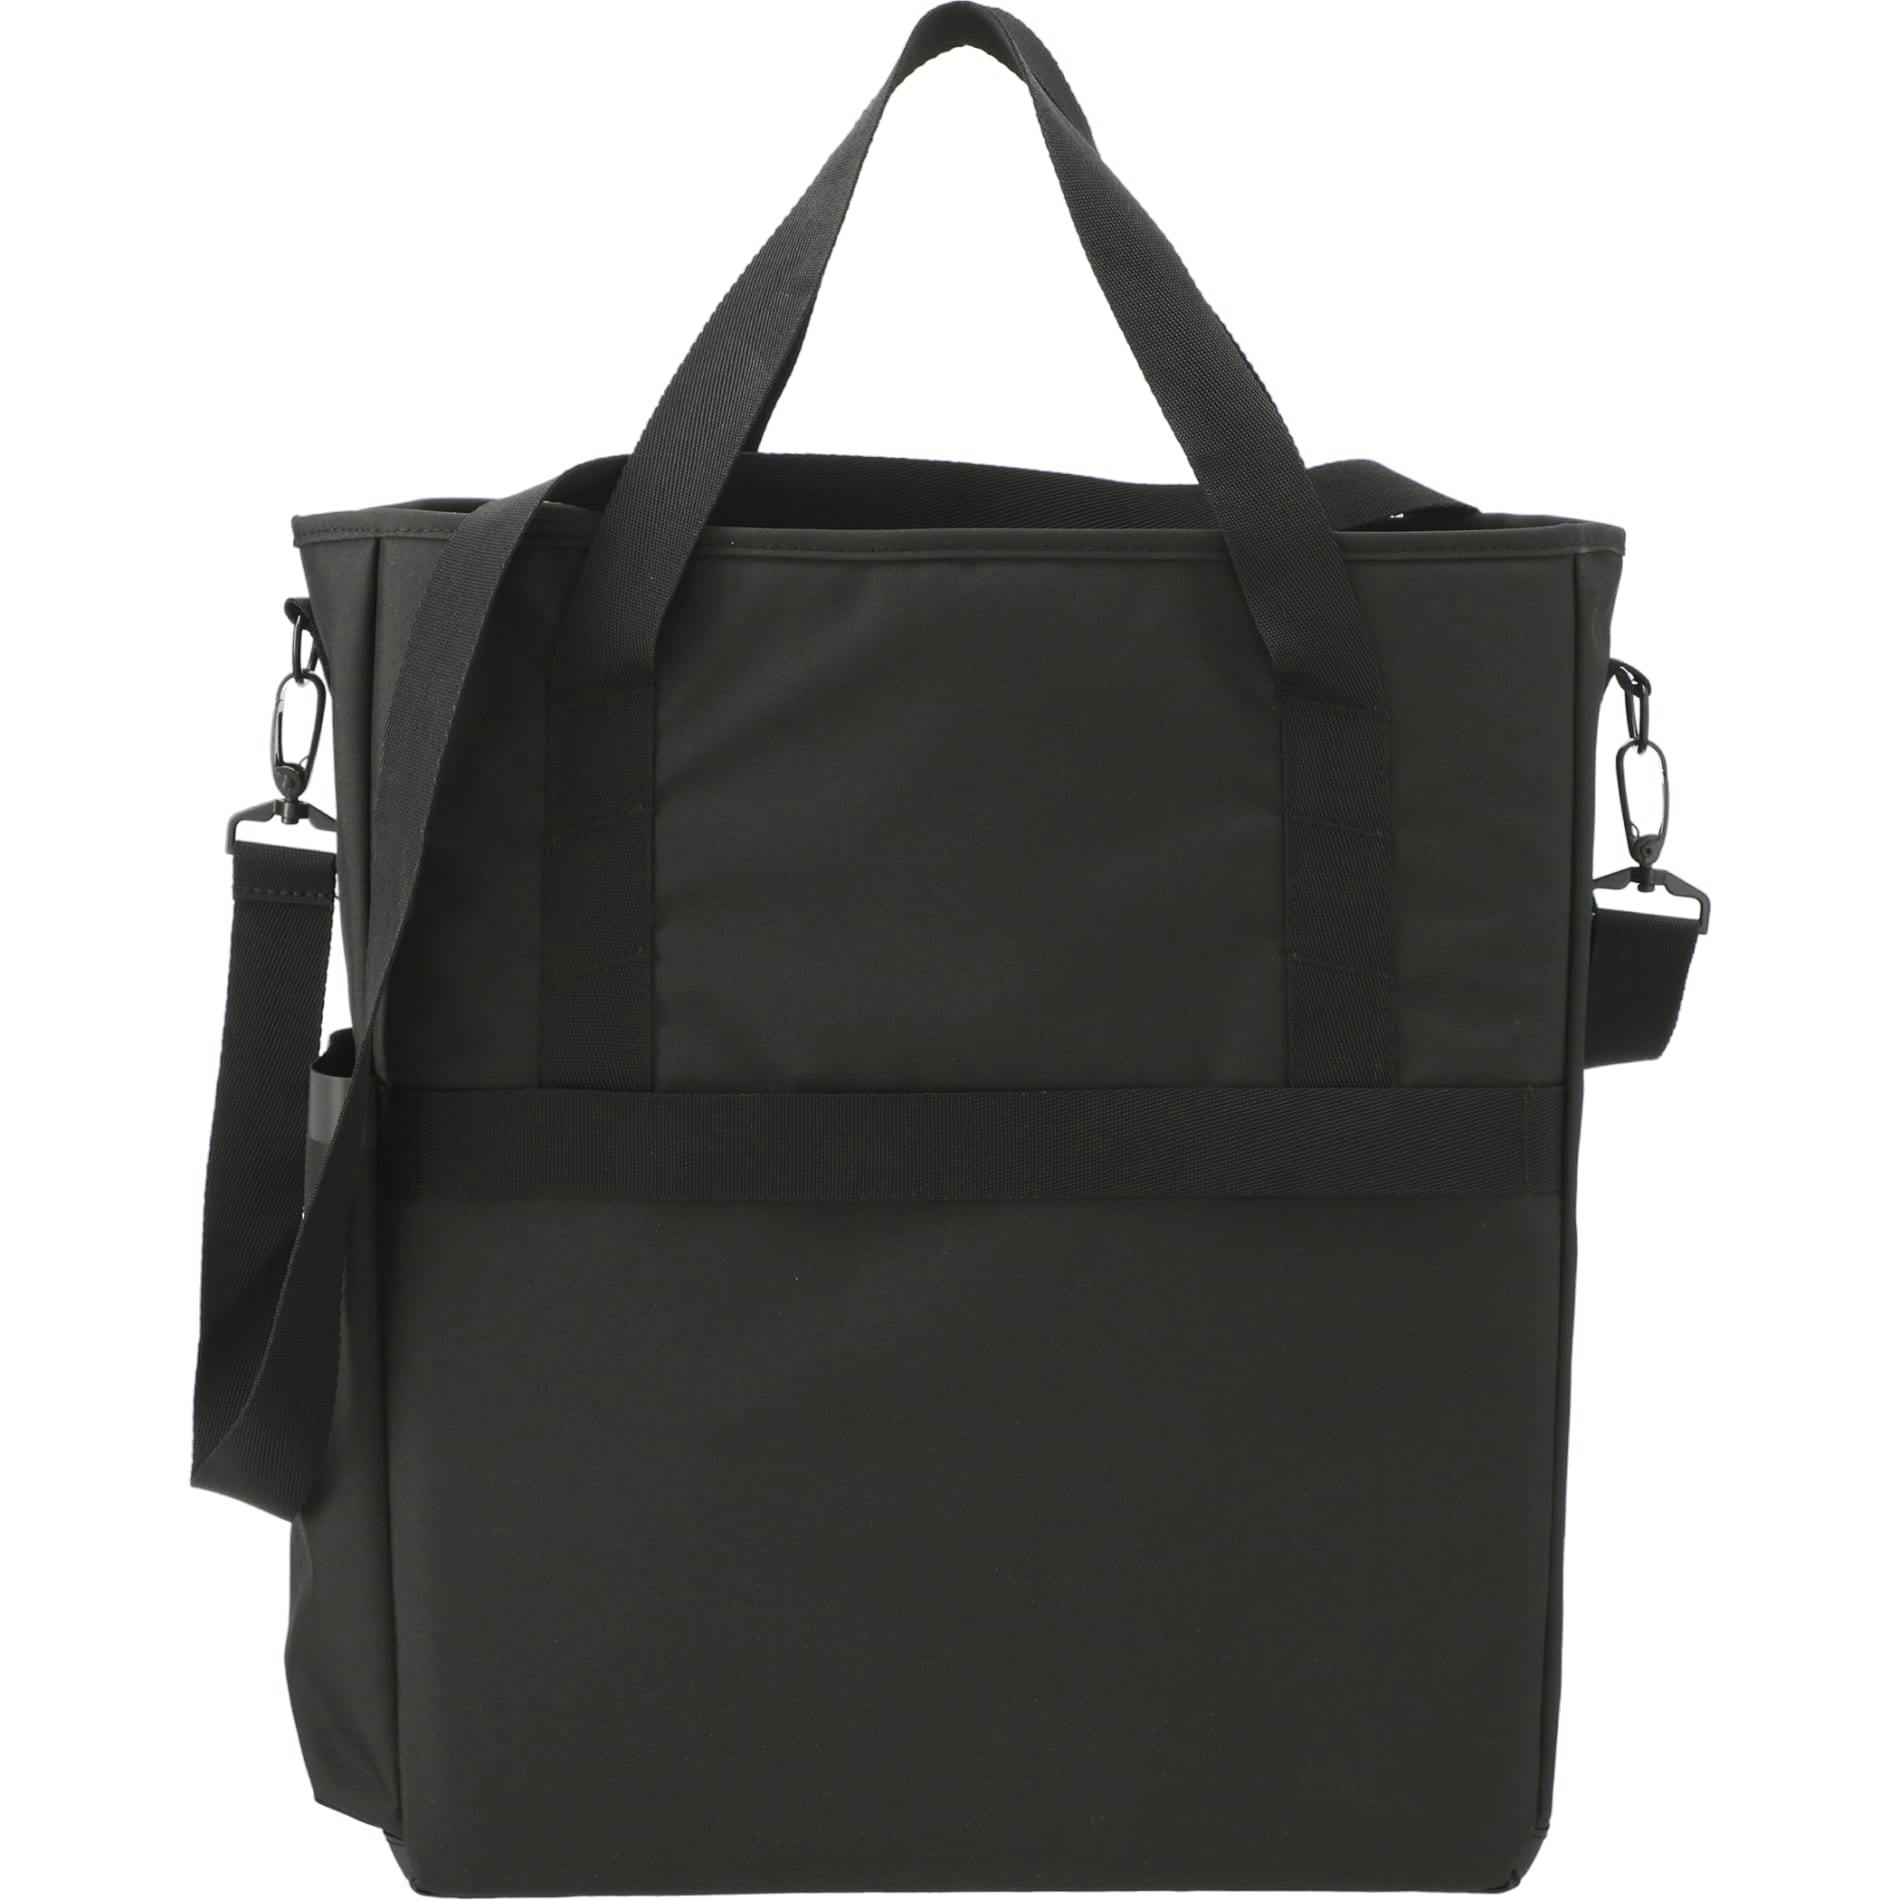 Tranzip Recycled Computer Tote - additional Image 4